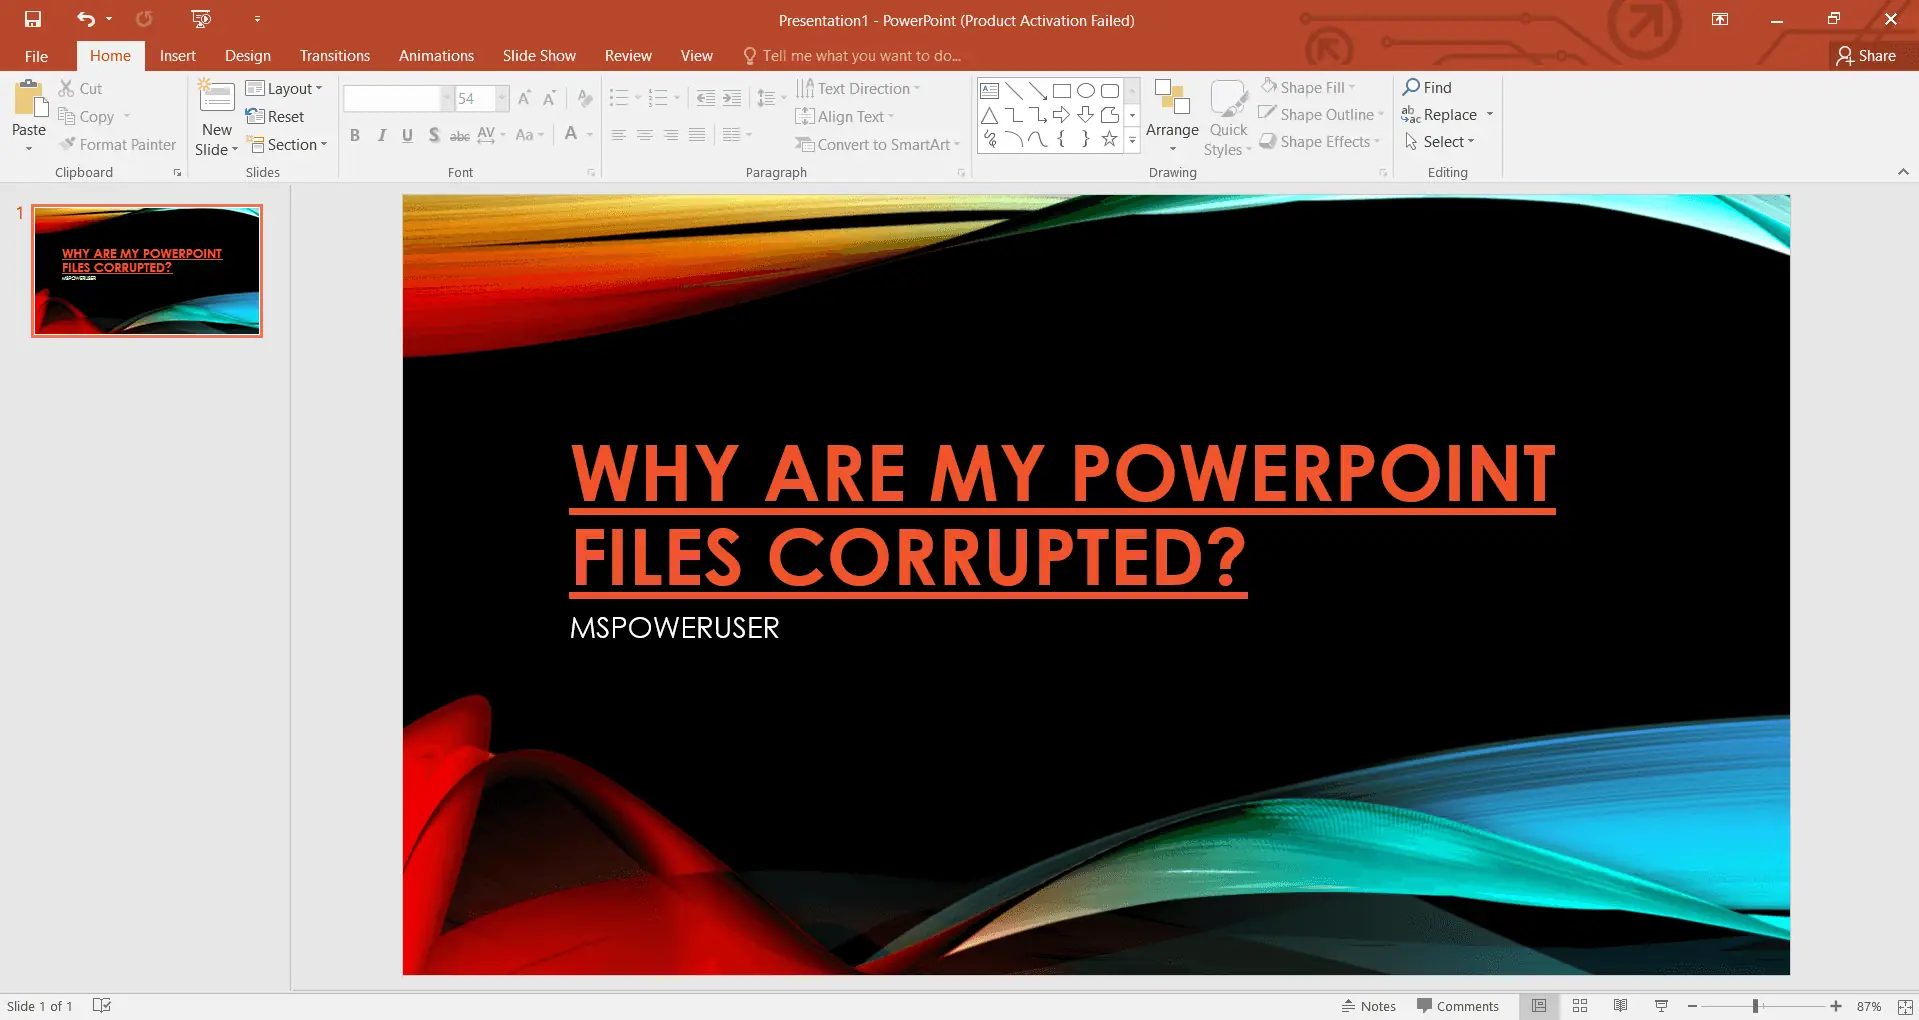 Why are my PowerPoint files corrupted